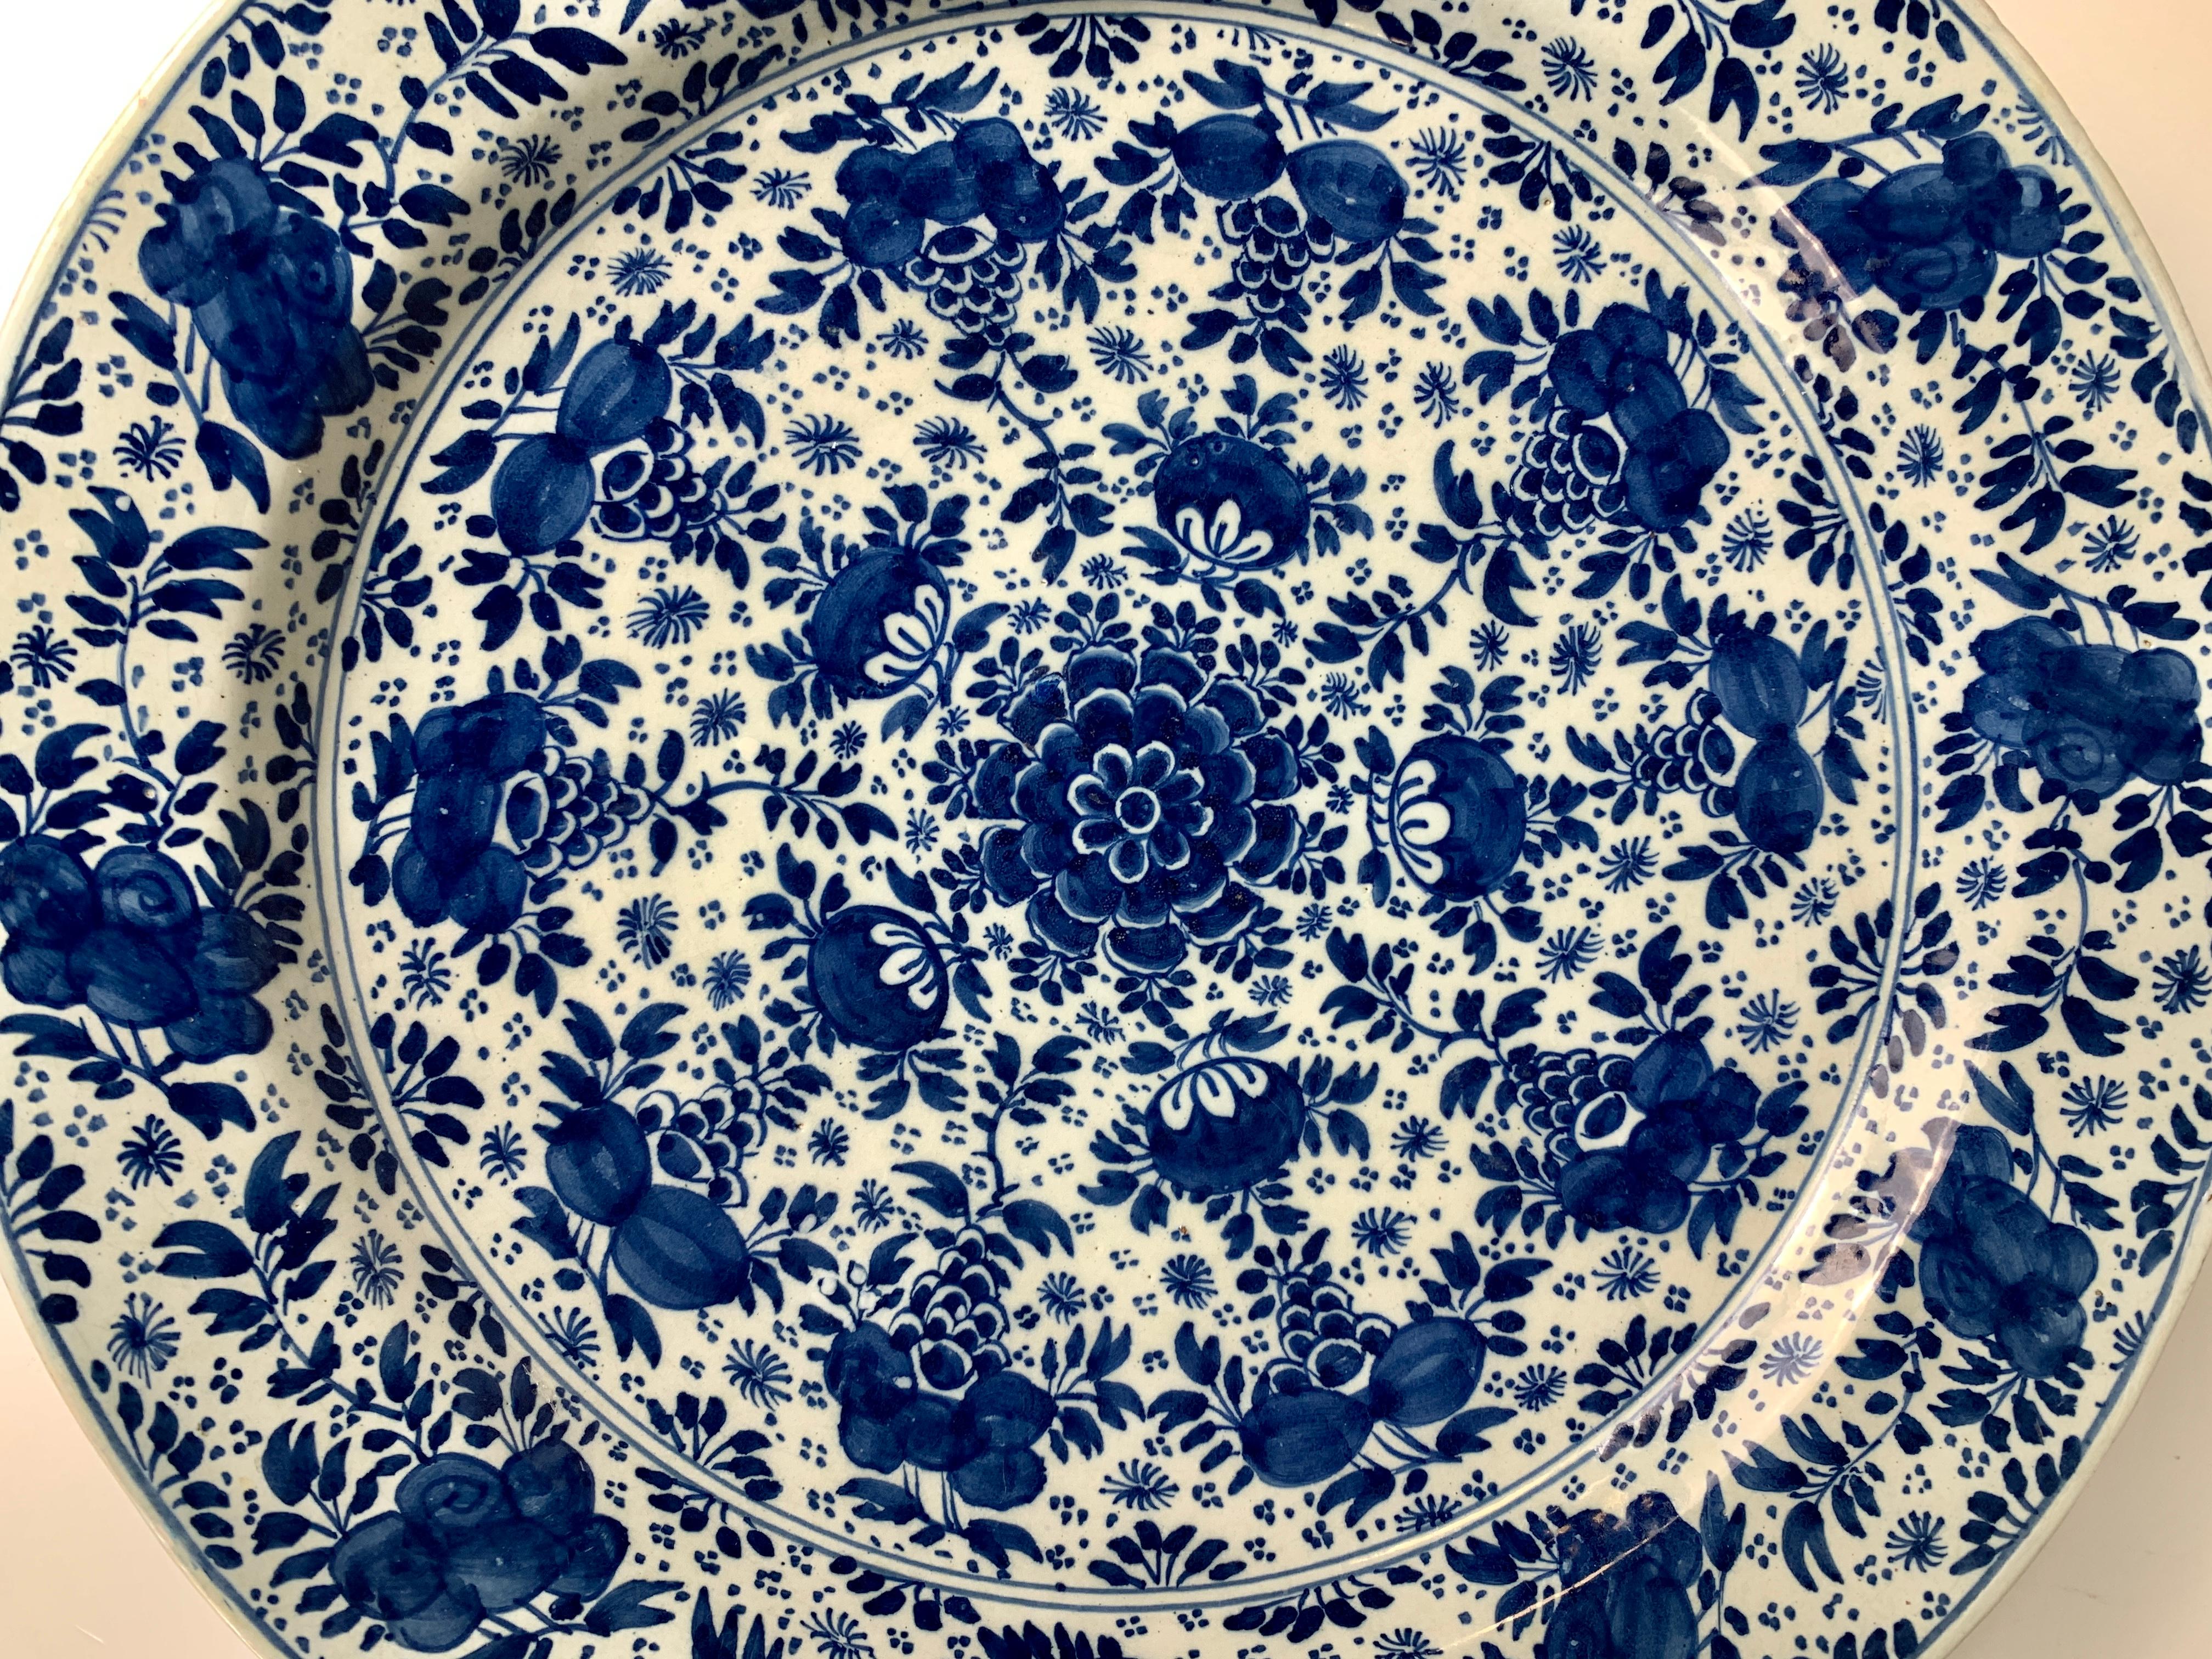 A huge blue and white Delft charger hand-painted in cobalt blue with peonies encircling a central flower.
Made in the Netherlands circa 1760, the charger is decorated all over with flowers arranged in a floral pattern (see image #2)
The reverse of